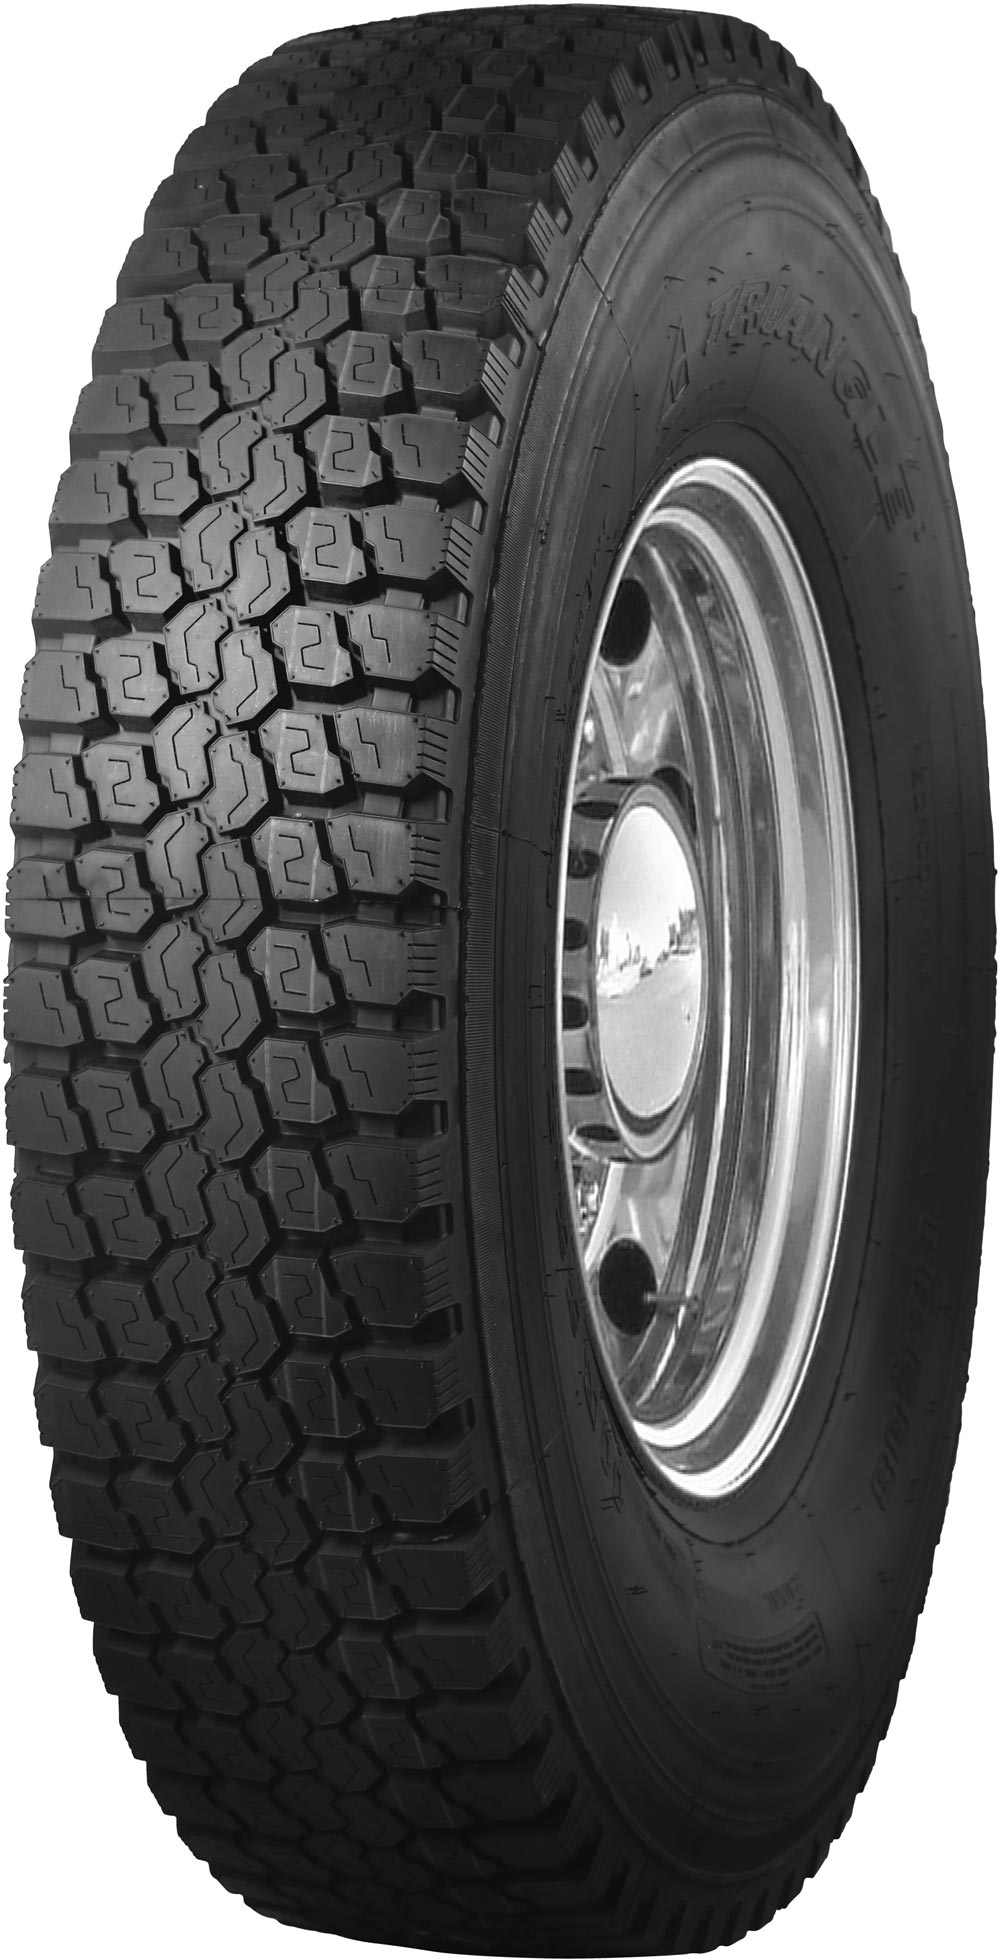 product_type-heavy_tires Triangle TR688 16PR 11 R22.5 148M